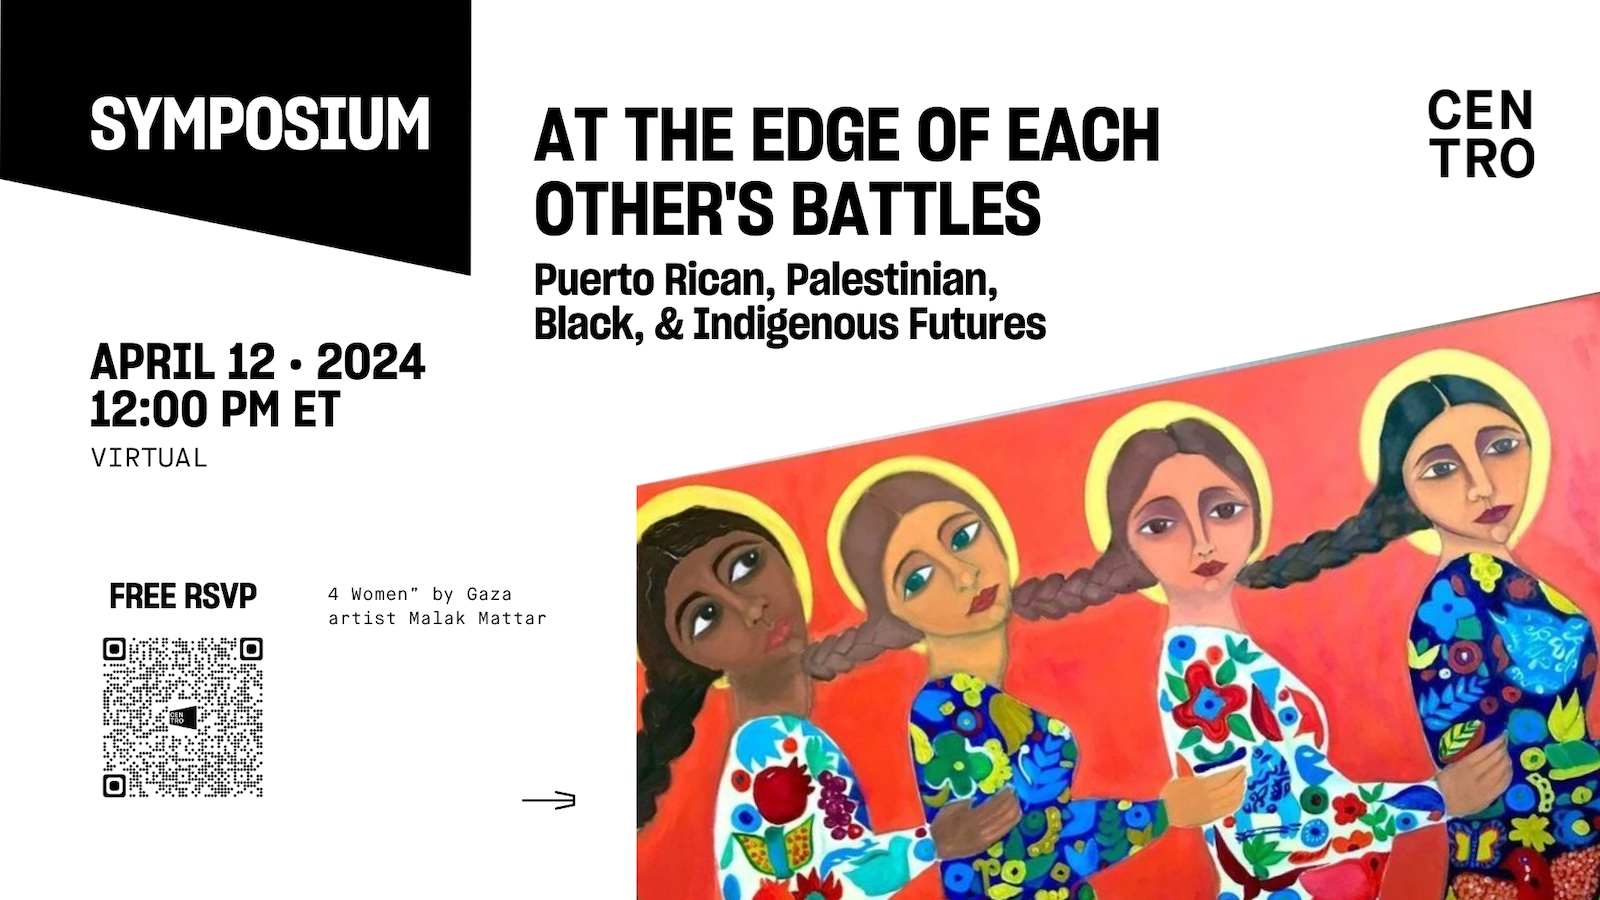 AT THE EDGE OF EACH OTHER’S BATTLES: PUERTO RICAN, PALESTINIAN, BLACK & INDIGENOUS FUTURES